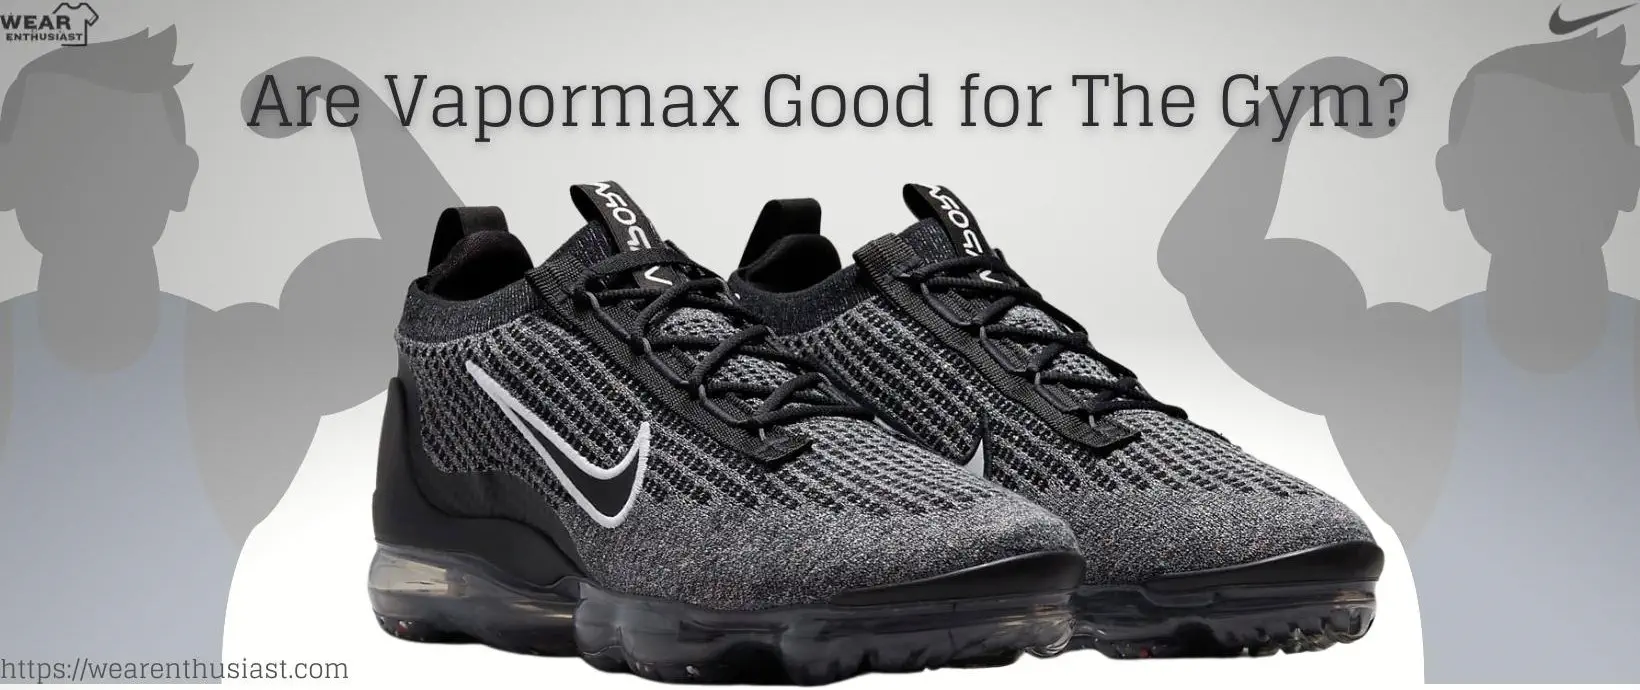 Are Vapormax good for the gym?